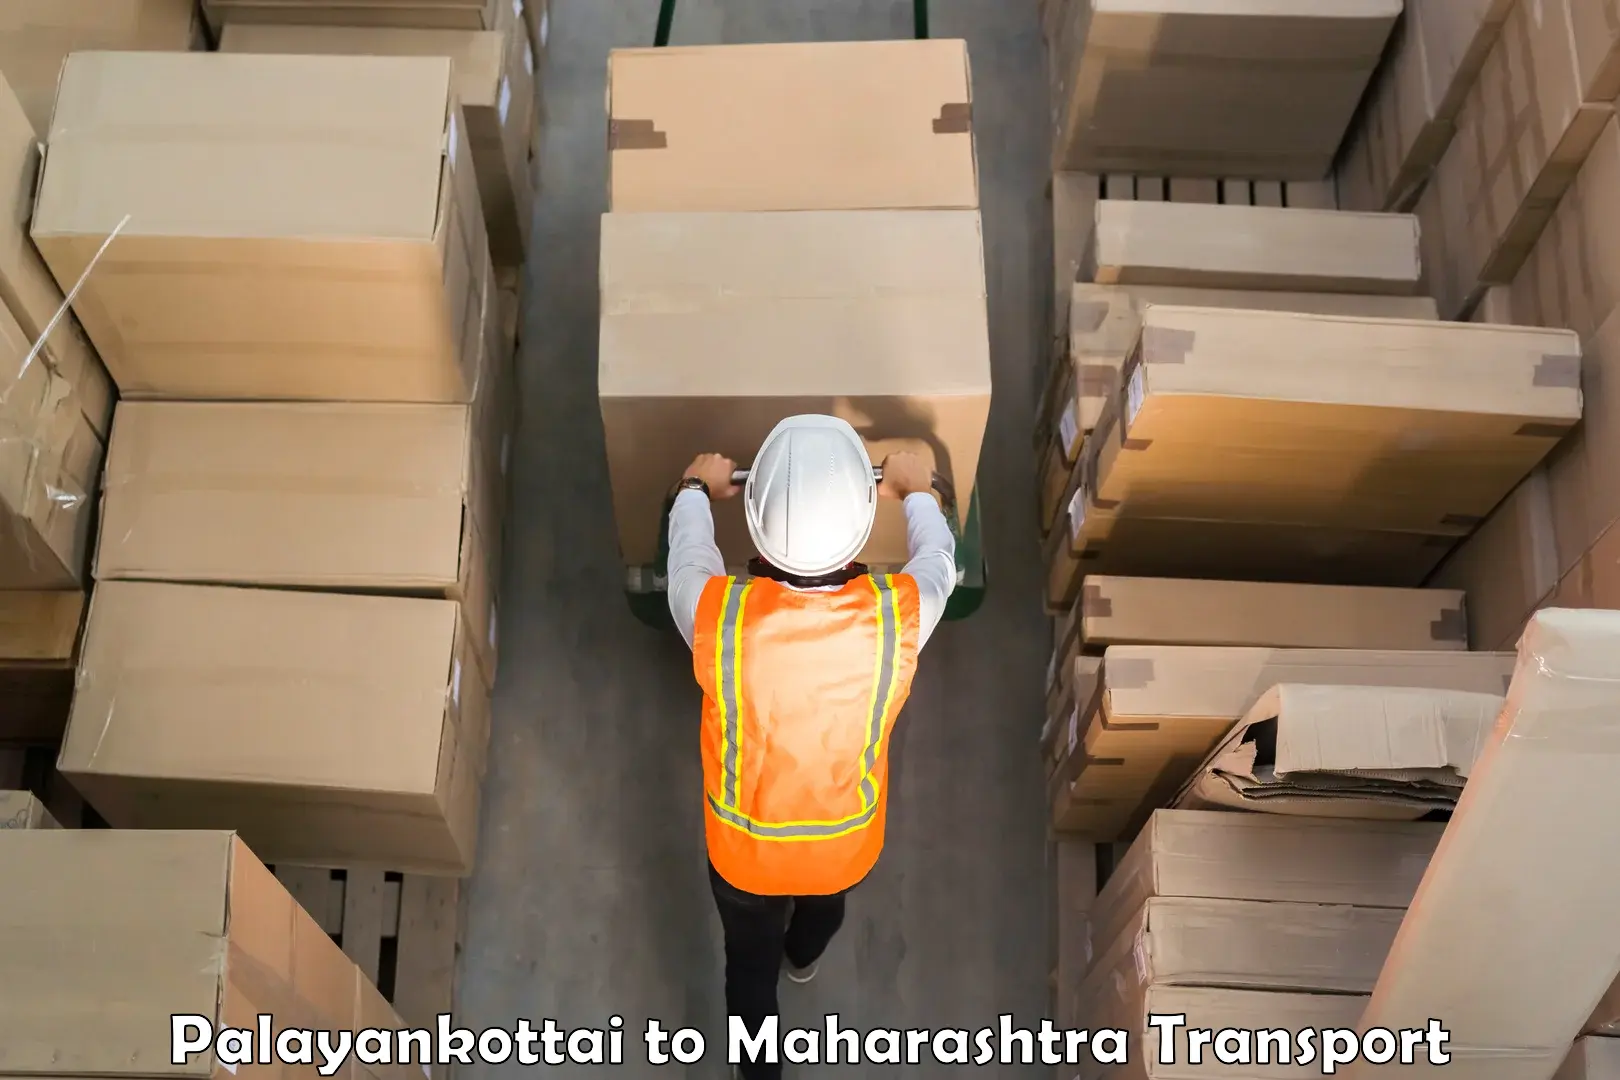 Cargo transport services in Palayankottai to Dongarkinhi